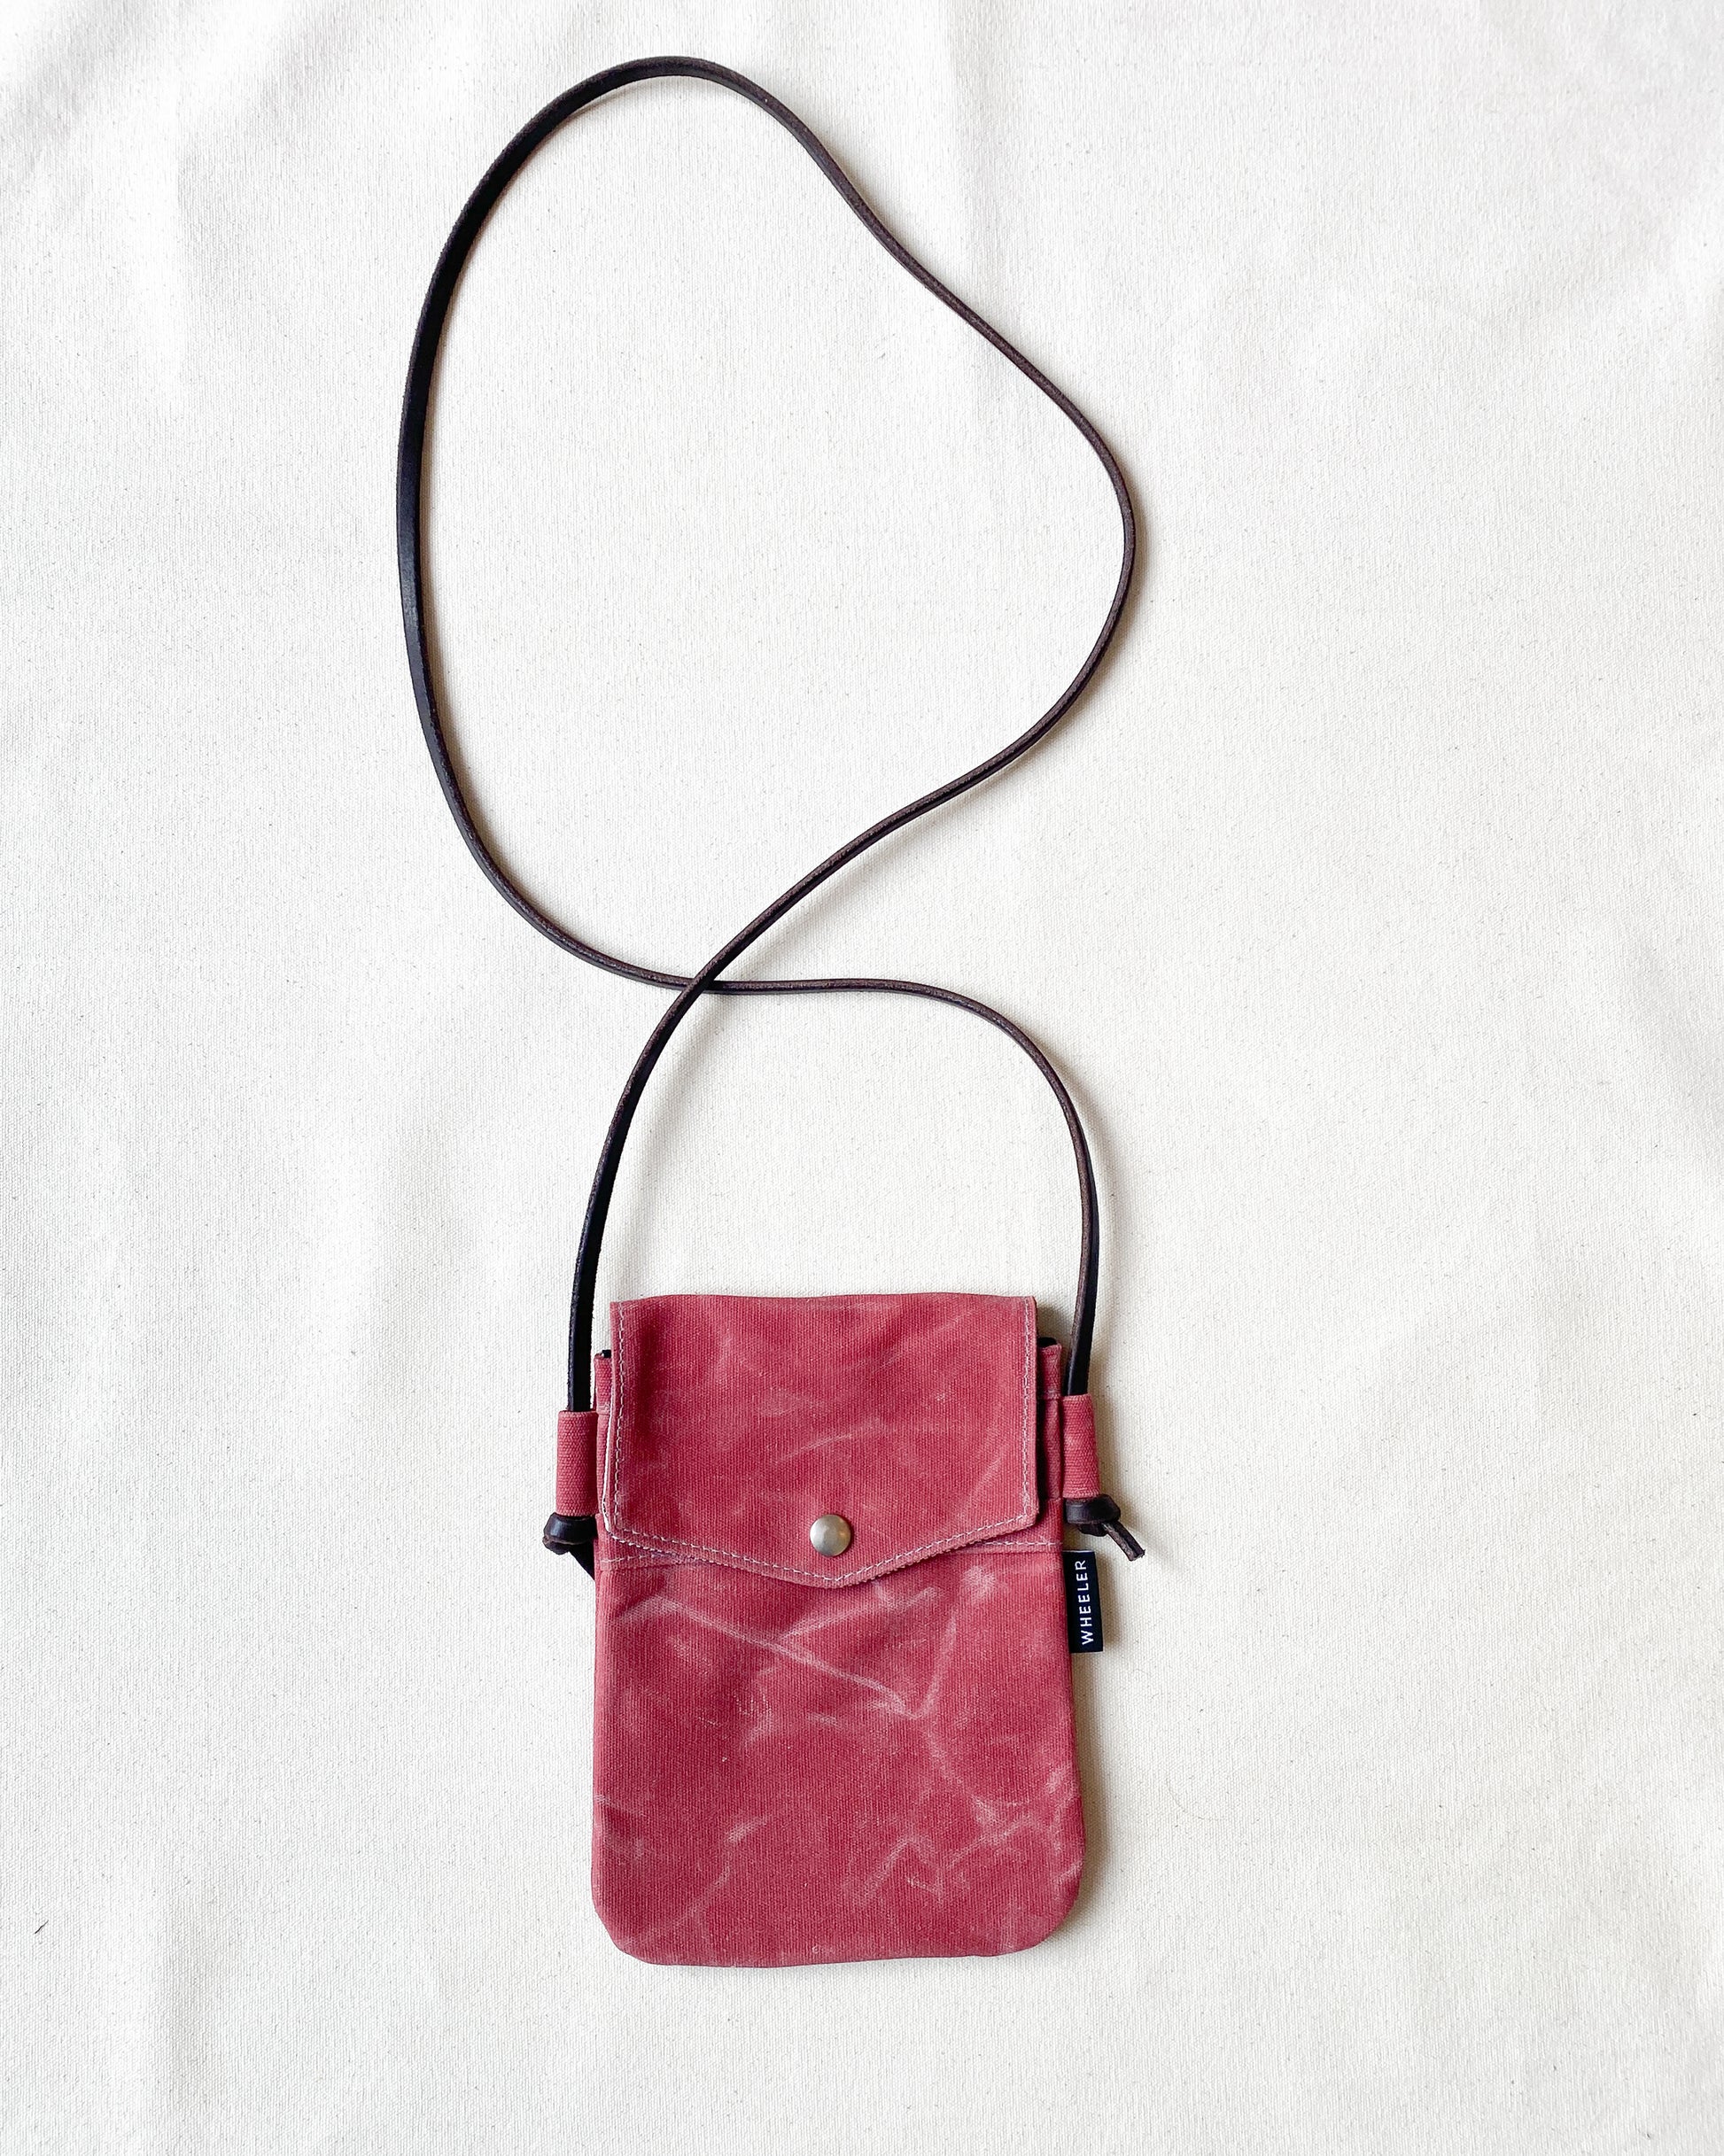 Waxed Canvas Simple Crossbody in all red.